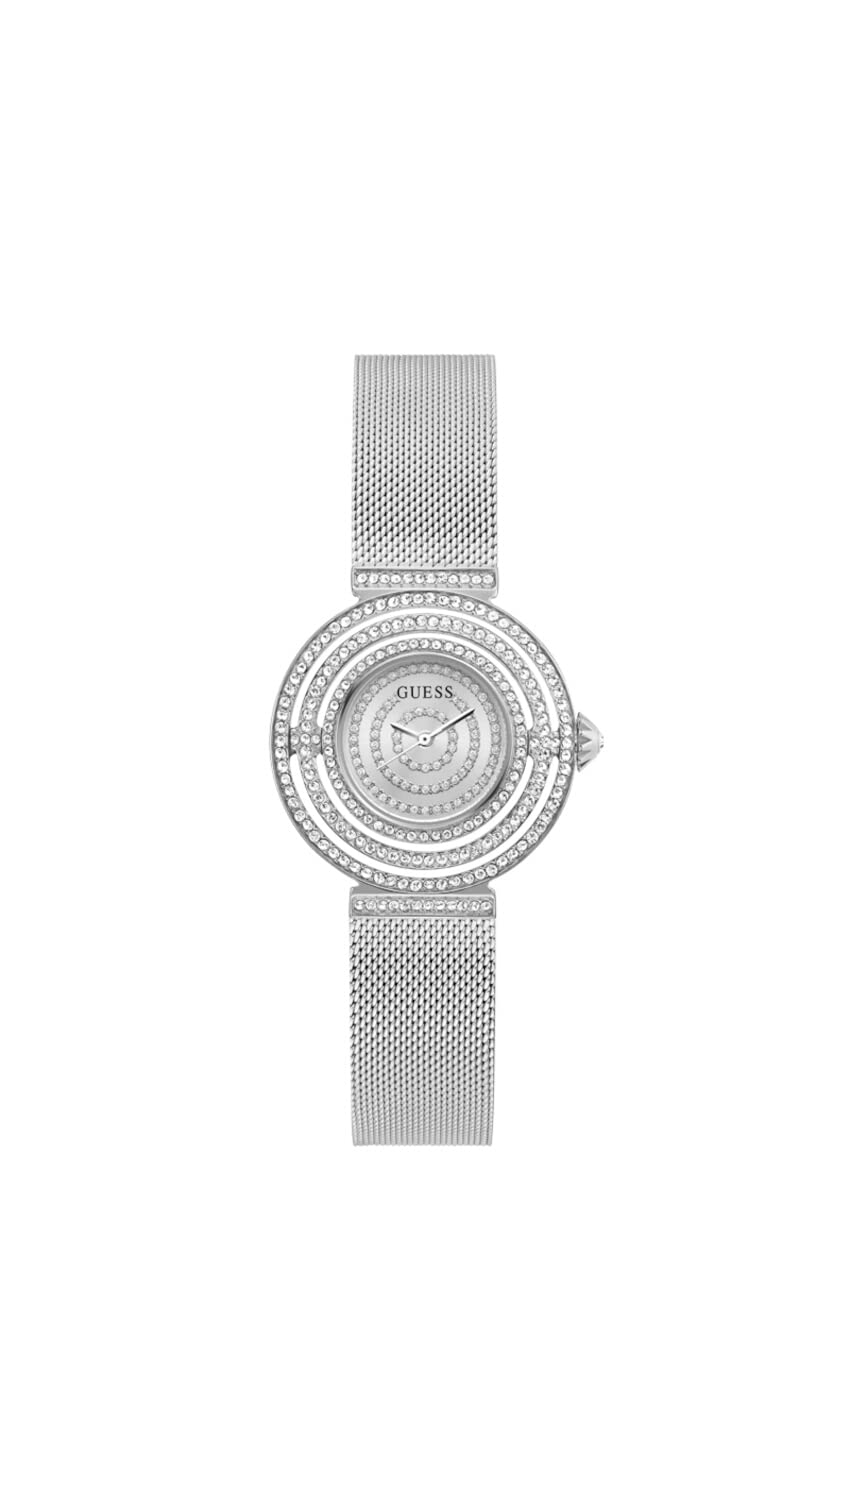 GUESS Ladies 36mm Watch - Silver Tone Strap Silver Dial Silver Tone Case